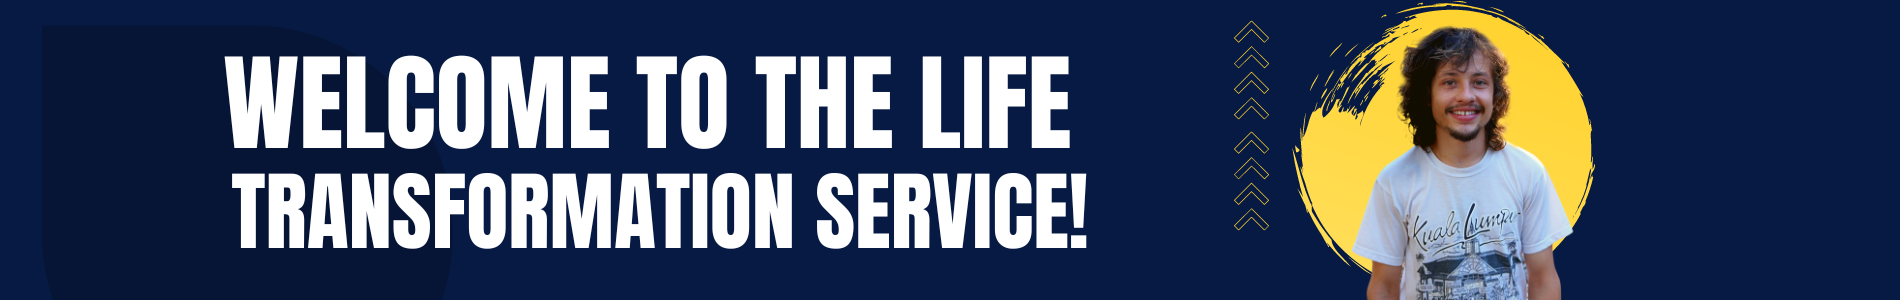 Welcome to the Life Transformation Service! (3)